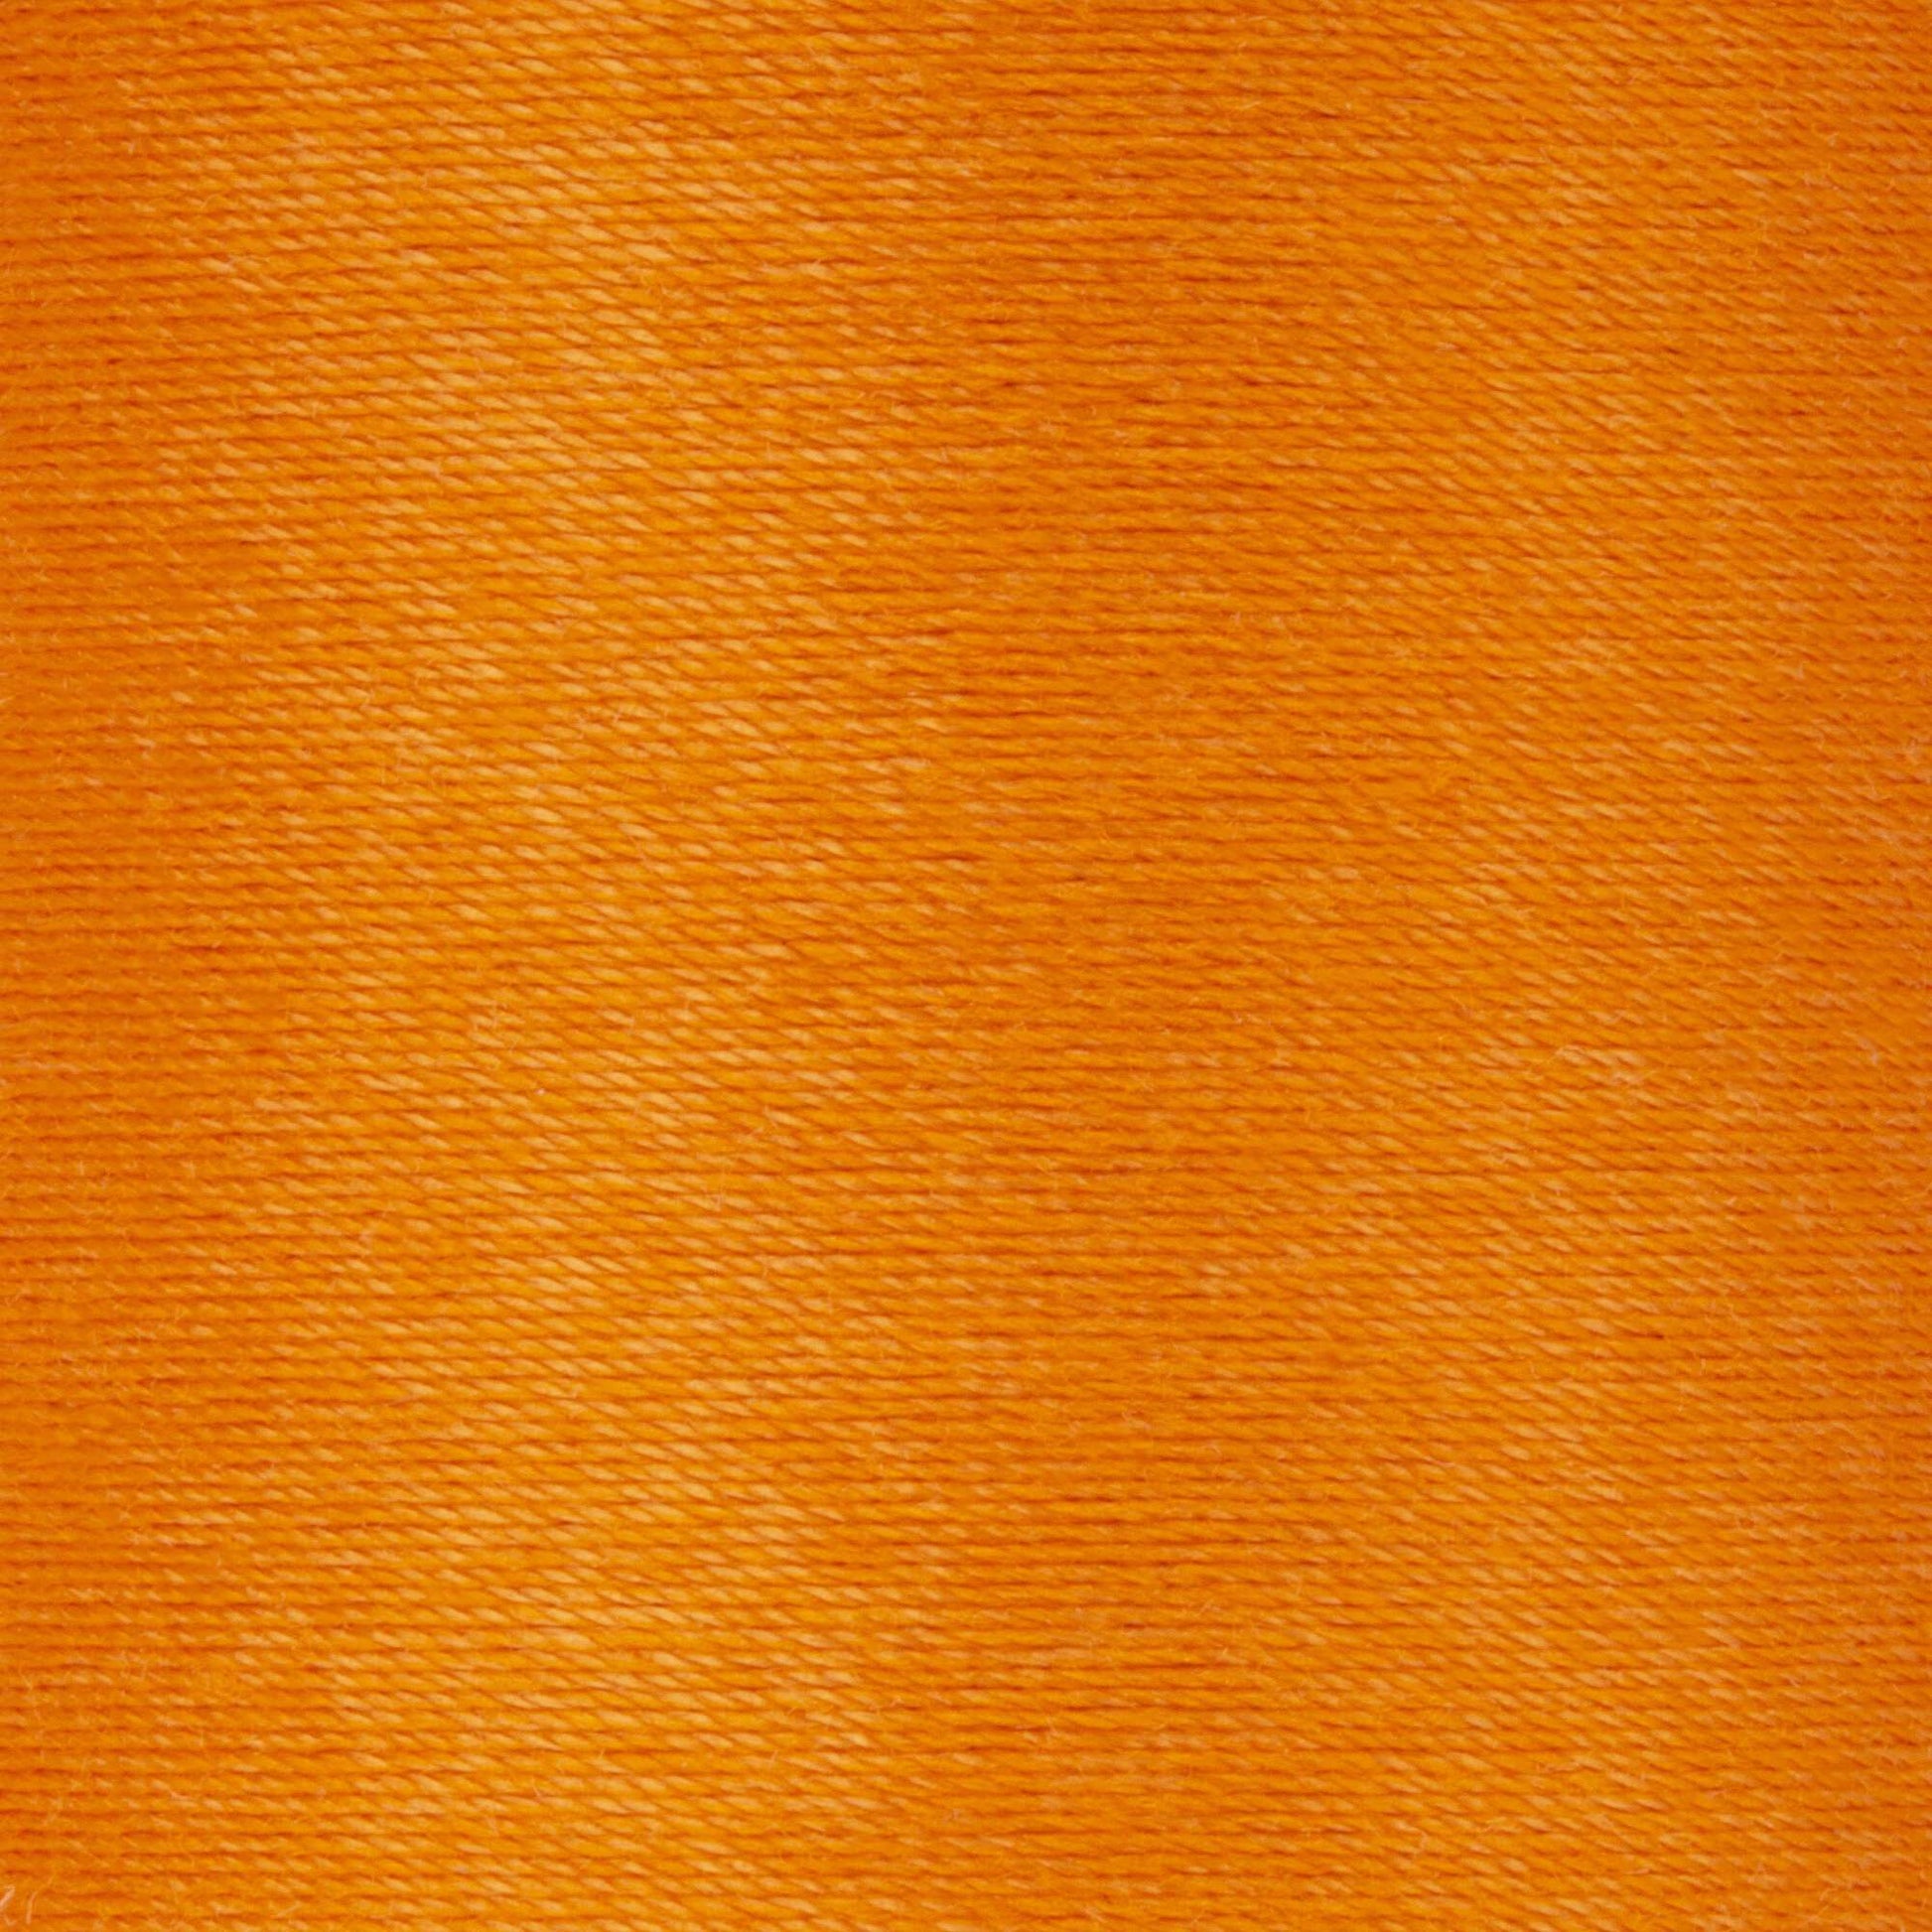 Coats & Clark Cotton Covered Quilting & Piecing Thread (500 Yards) Tangerine